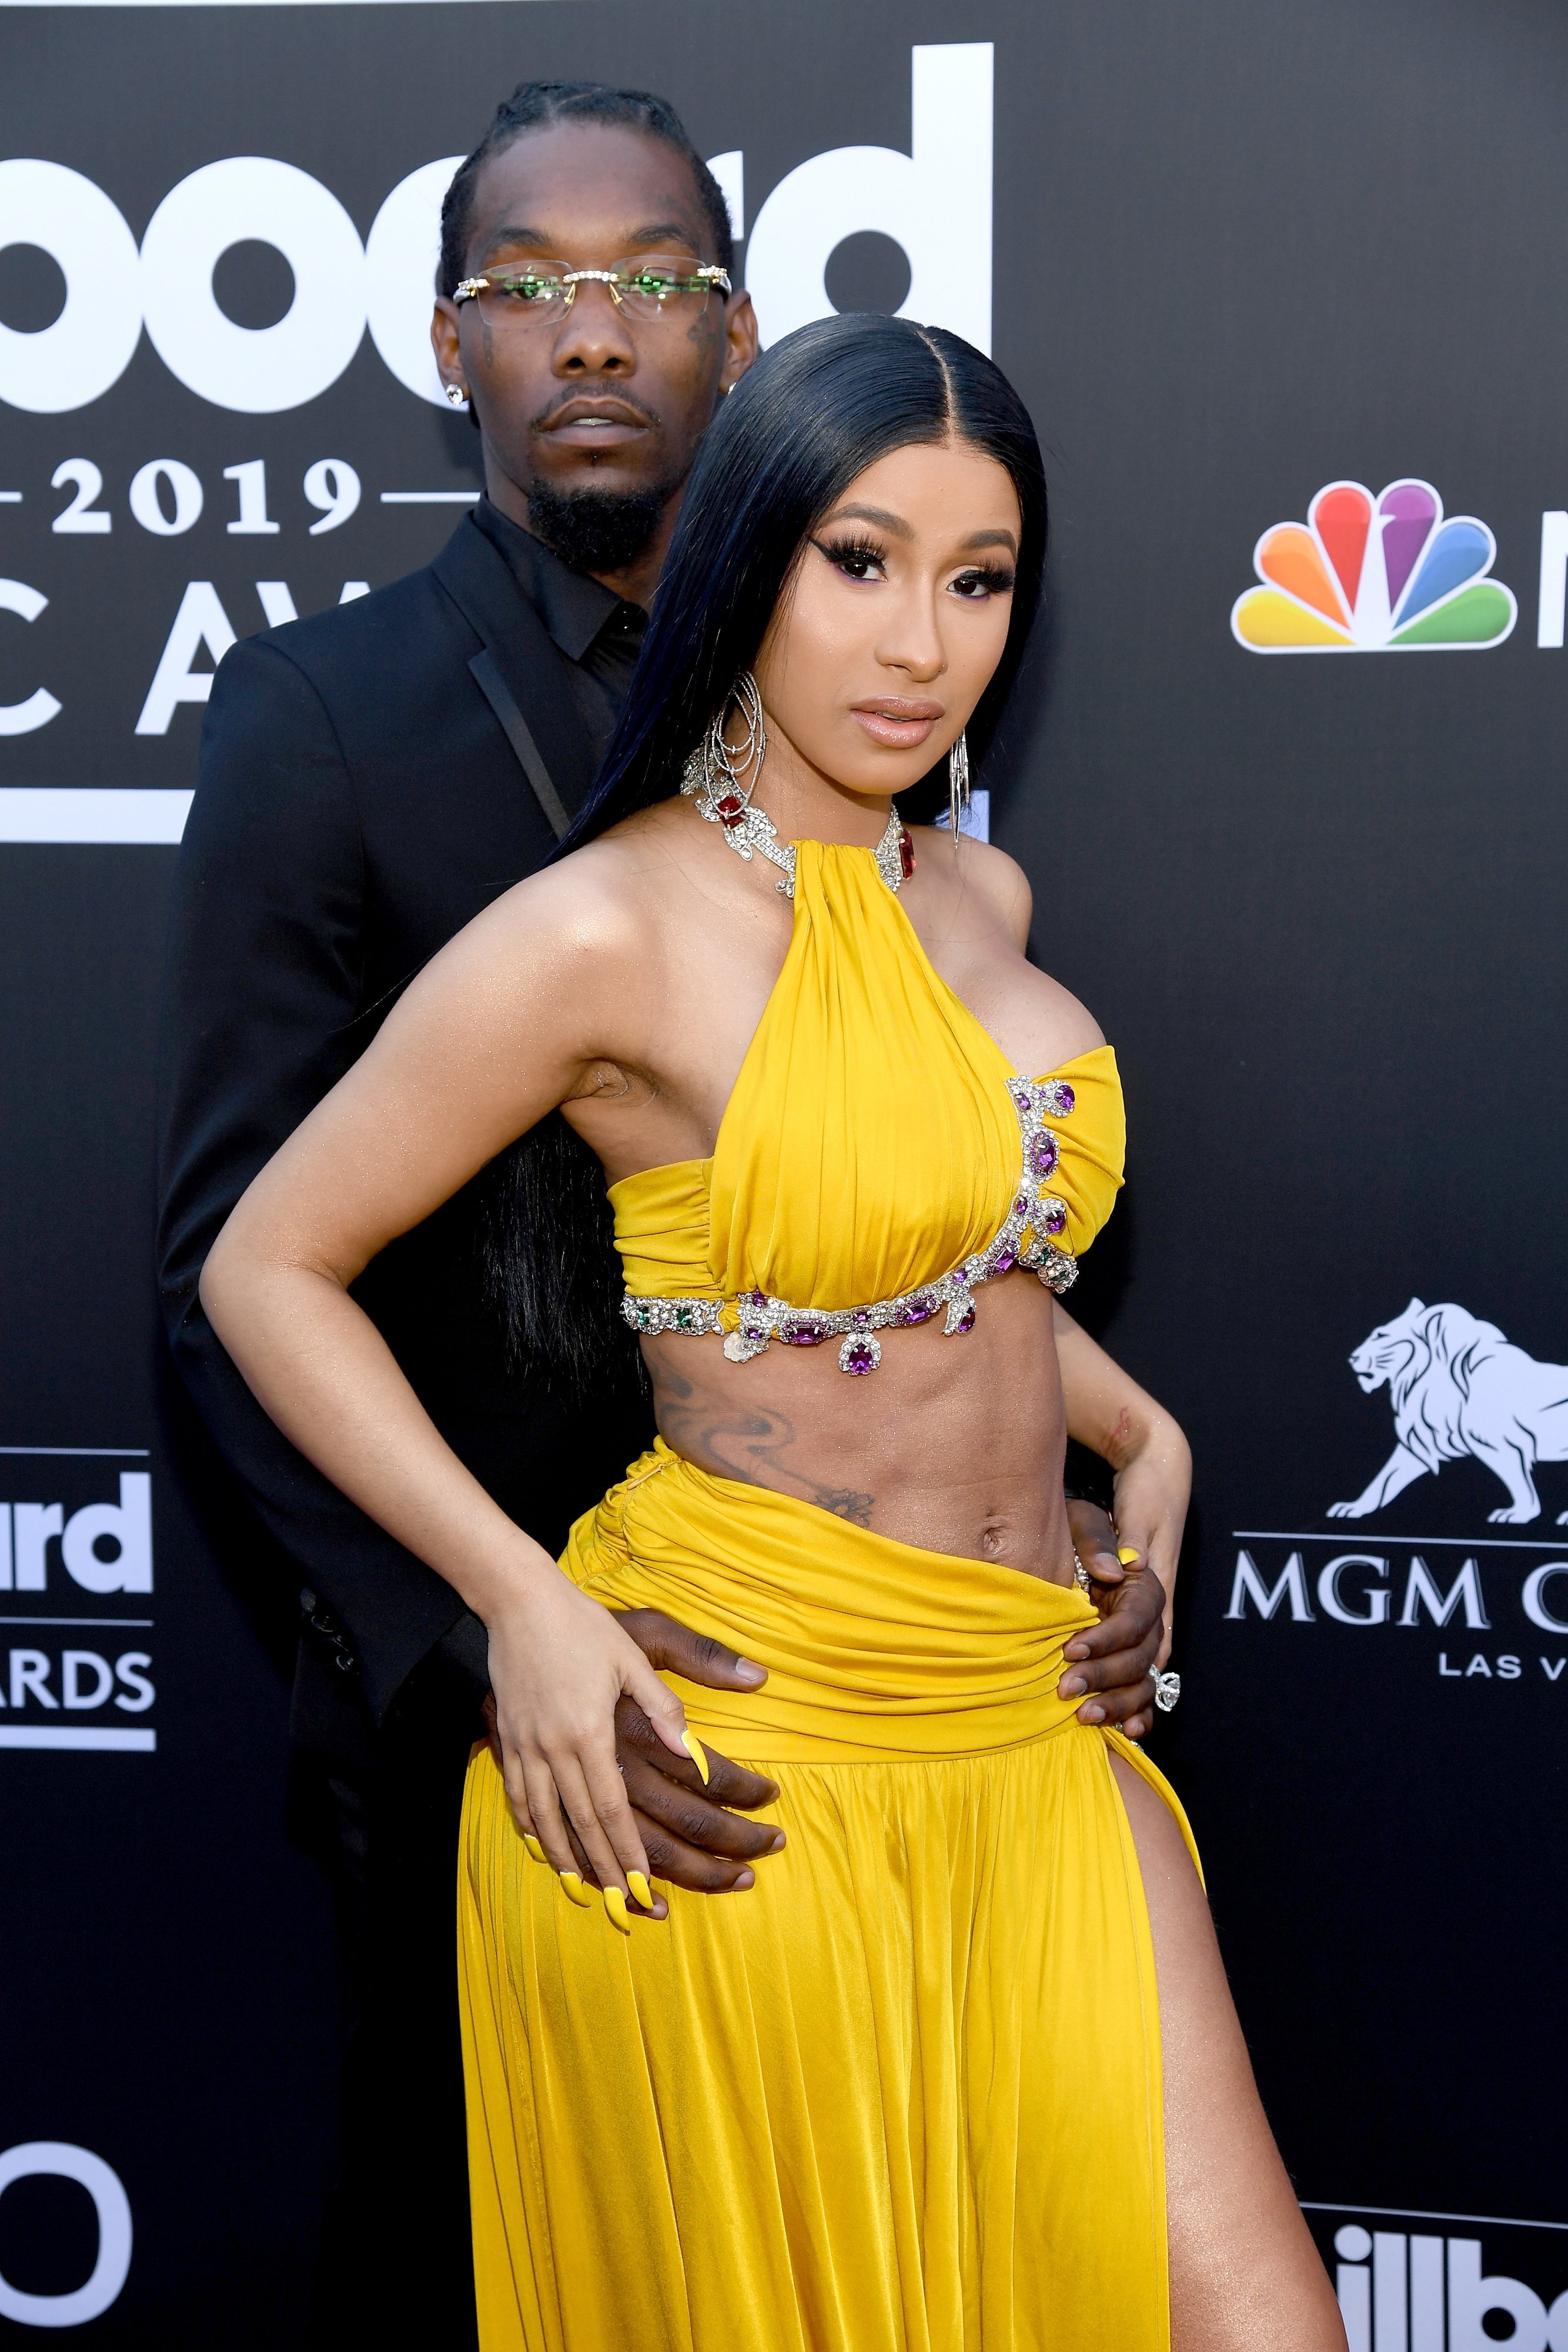 Offset and Cardi B at the 2019 Billboard Music Awards, 2019 in Las Vegas, Nevada | Source: Getty Images